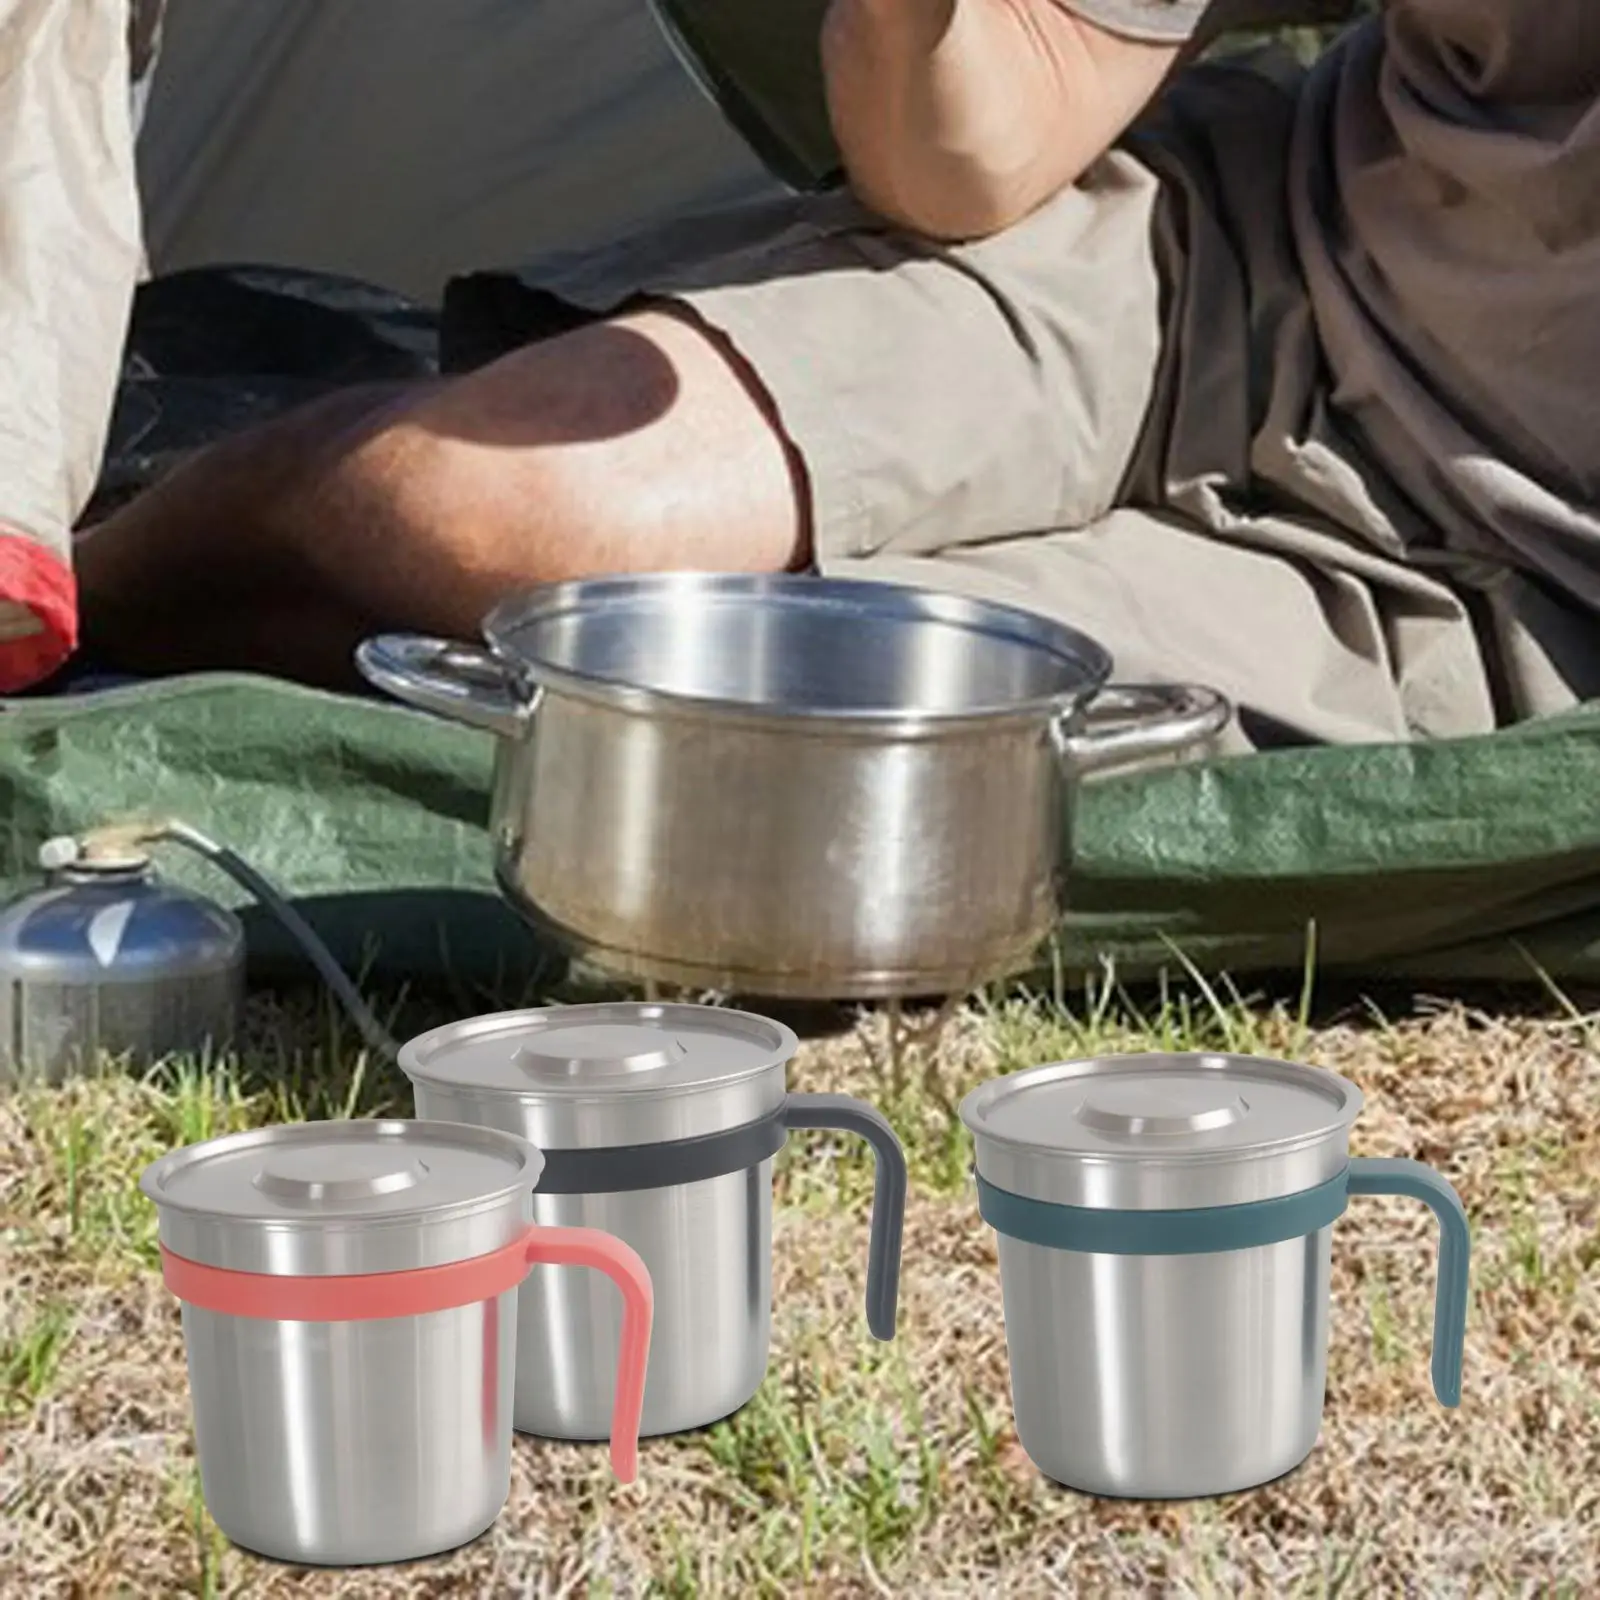 Camping Cup 448ml Capacity Metal Cups Stainless Steel Coffee Mug Tea Water Cup for Picnic Touring Travel Backpacking Cooking